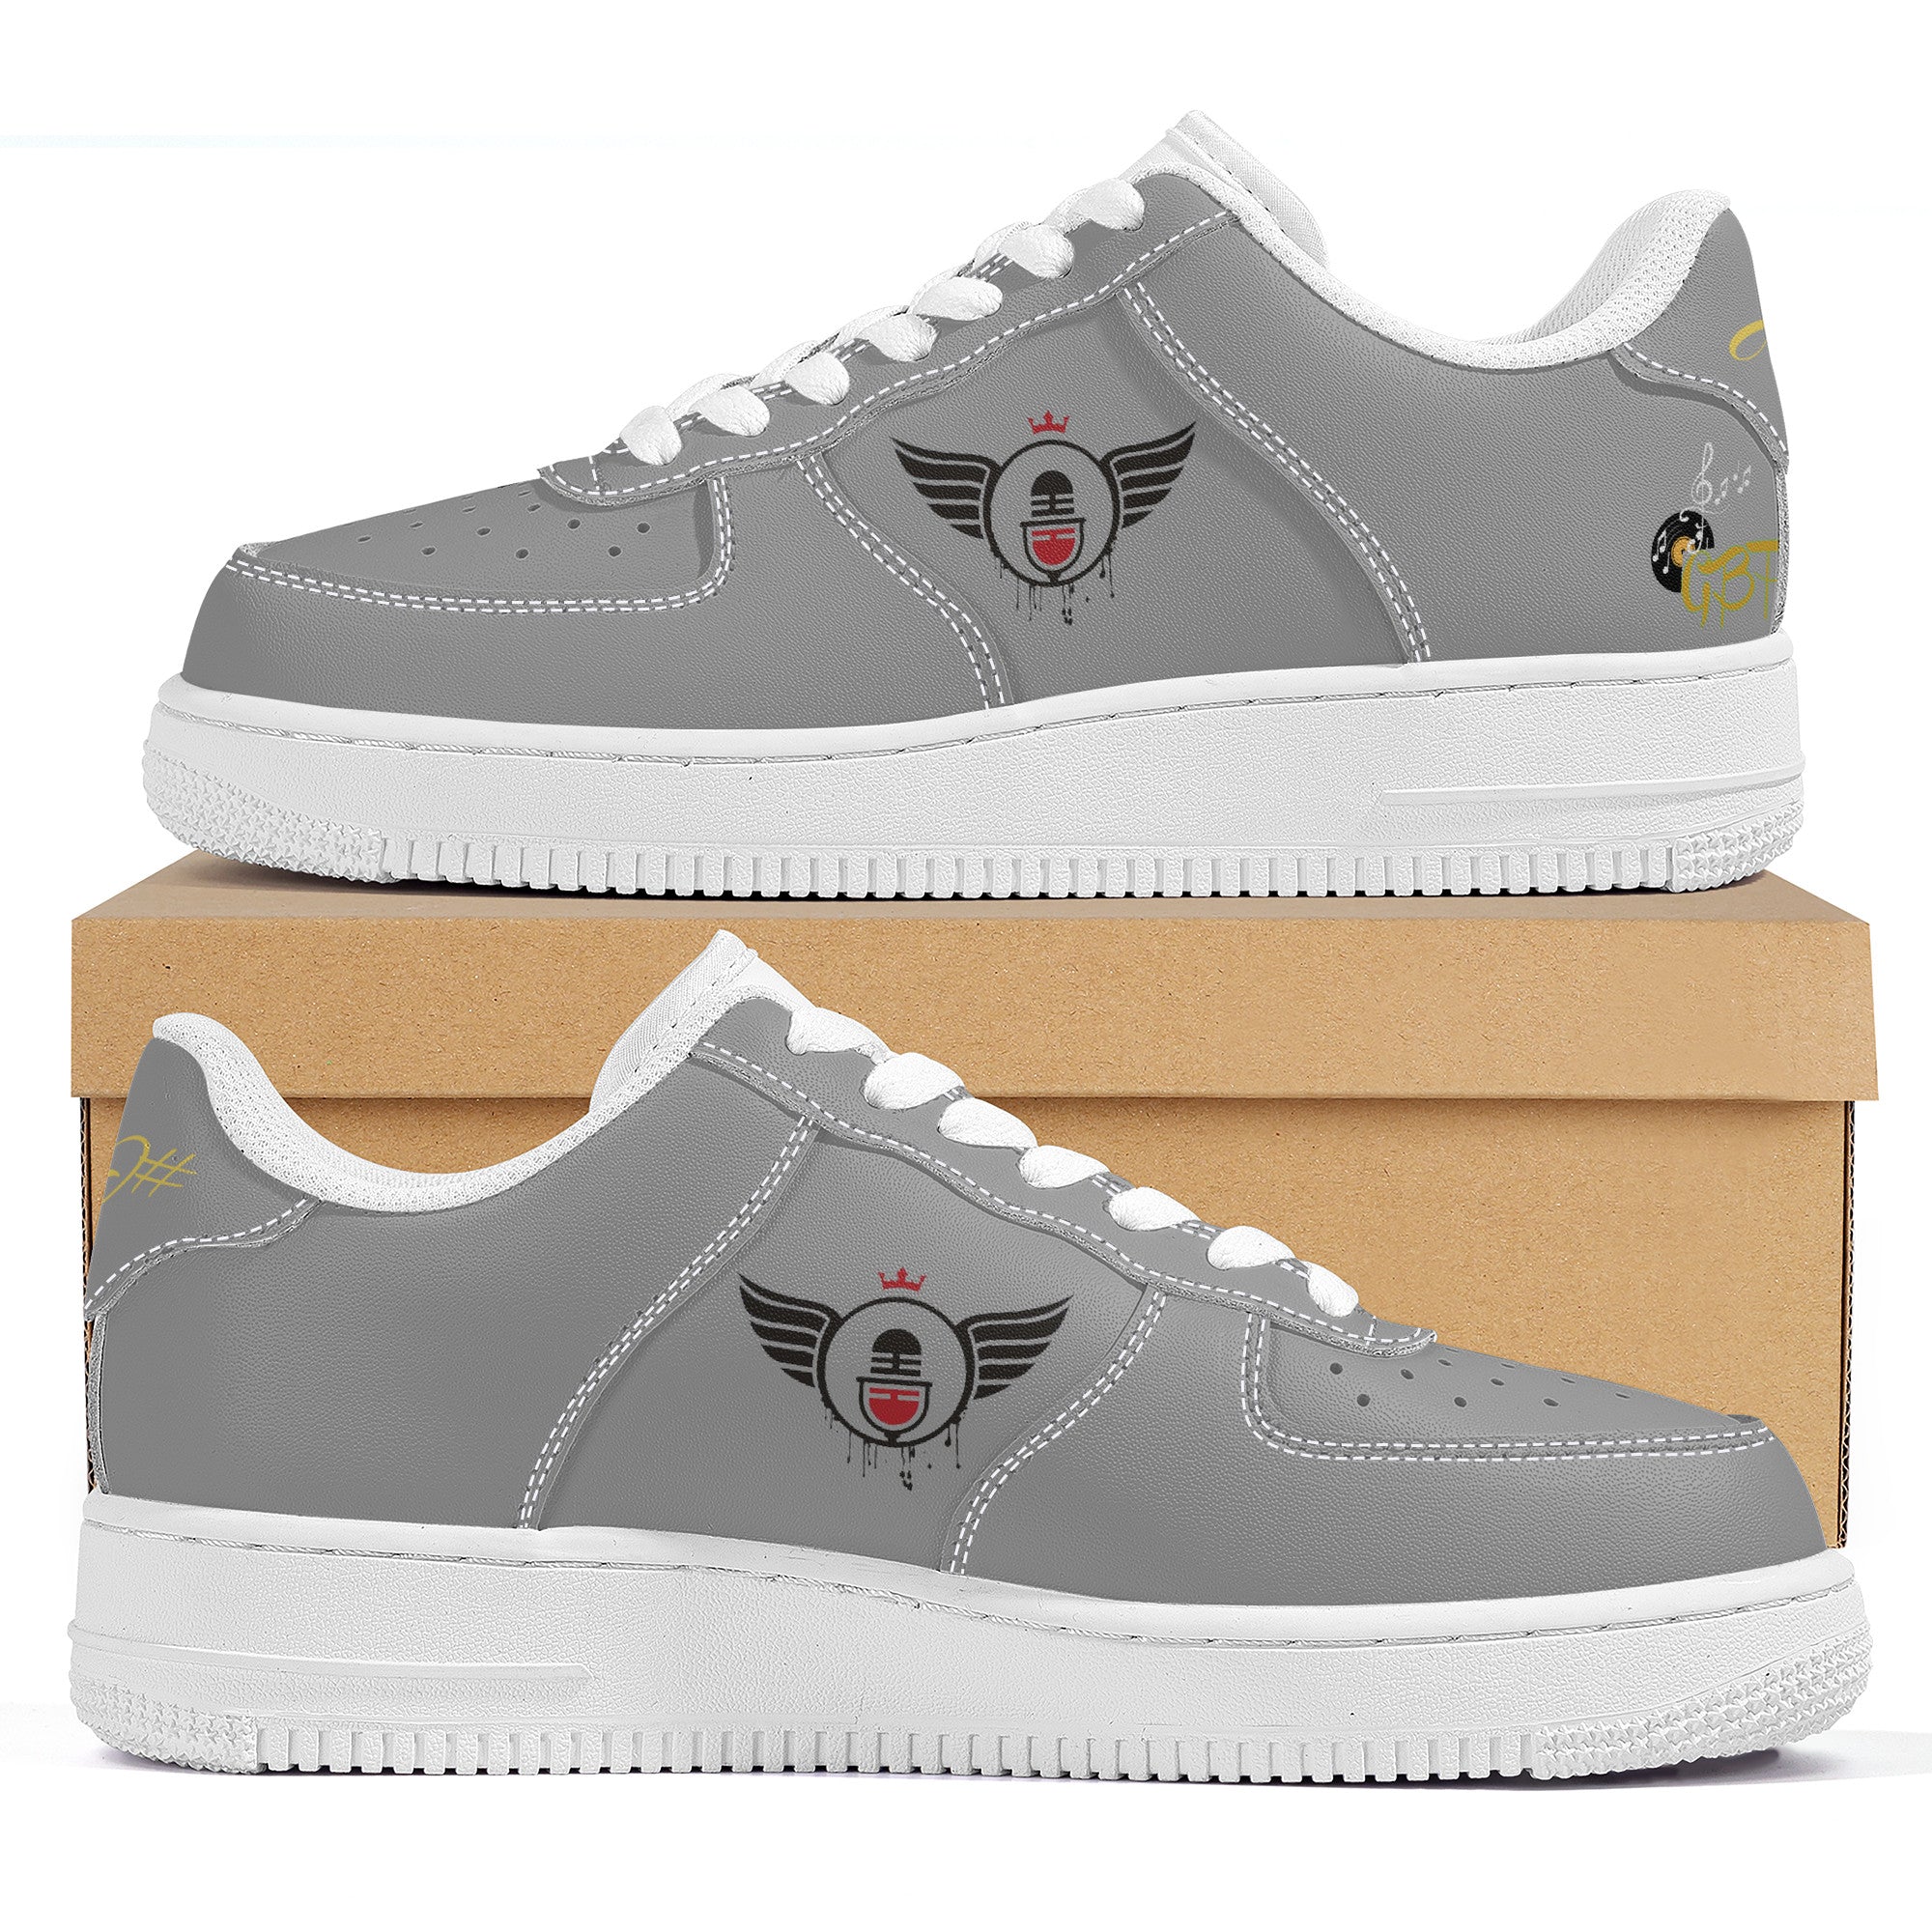 Basic Grey | Vision One Collection | Low Top Sneaker - Designed Shoe Drop - Shoe Zero